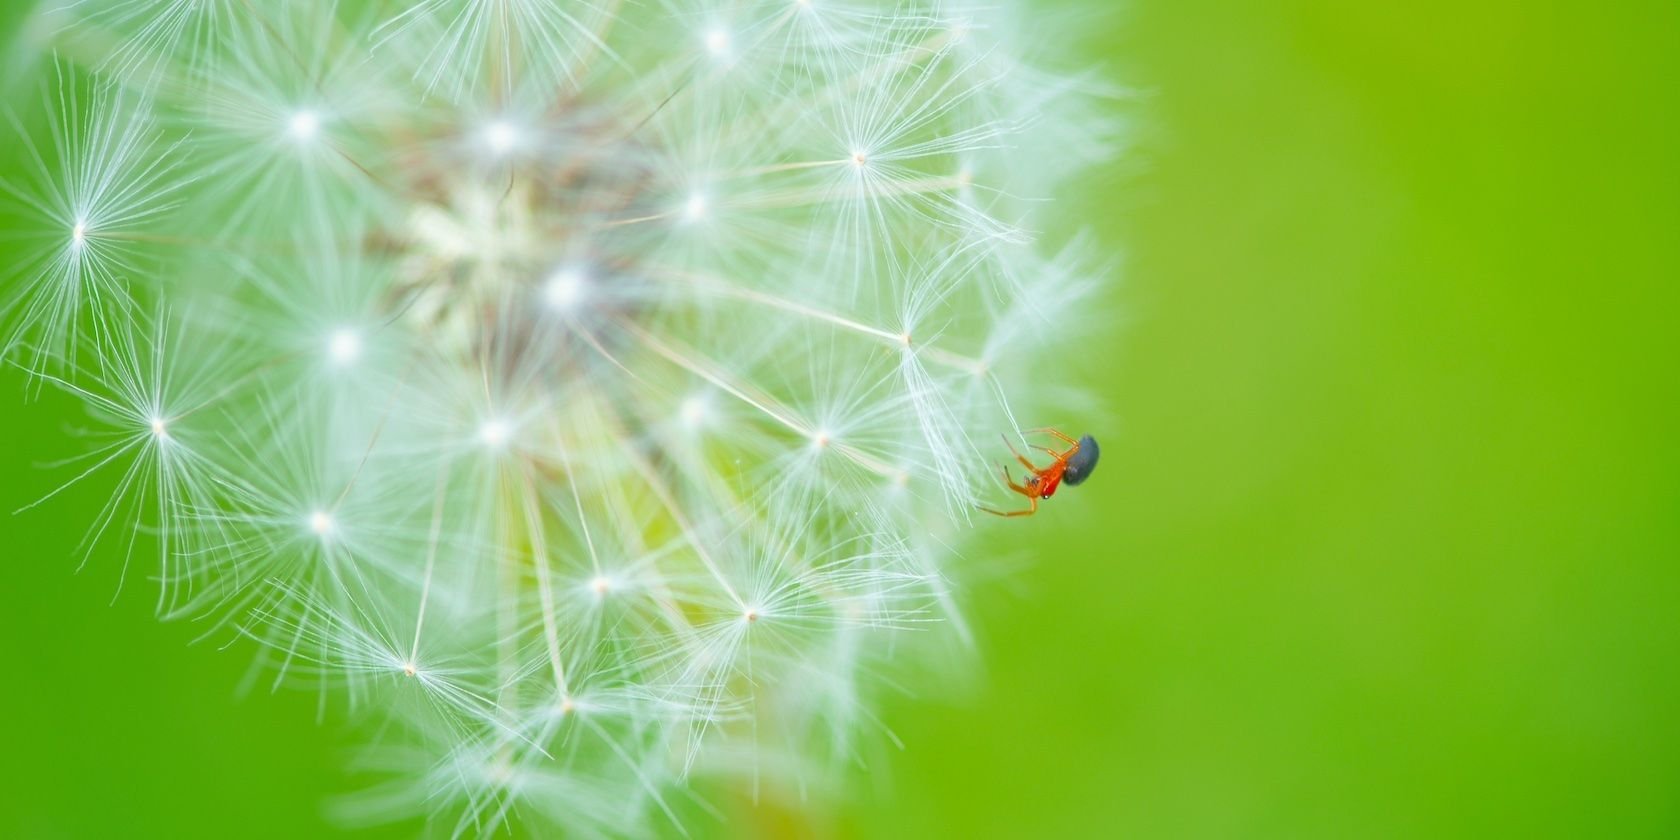 The Do's and Don'ts of Macro Photography